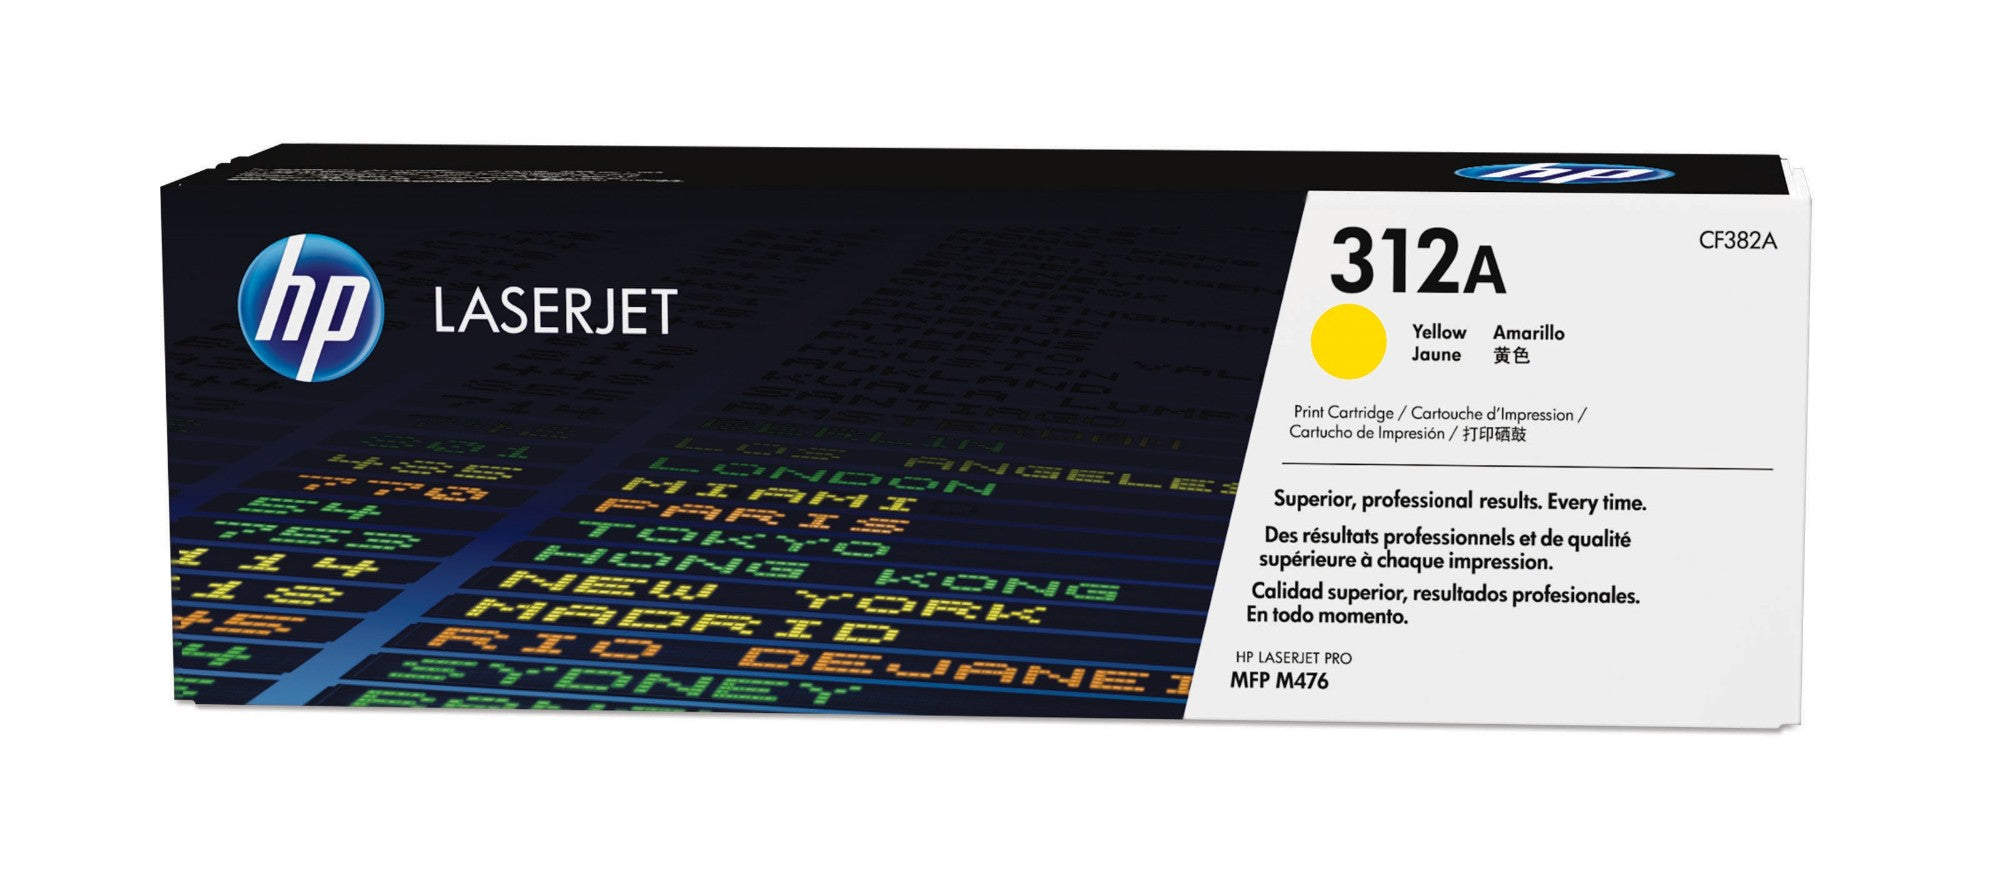 HP CF382A/312A Toner cartridge yellow, 2.7K pages ISO/IEC 19798 for HP CLJ Pro M 476